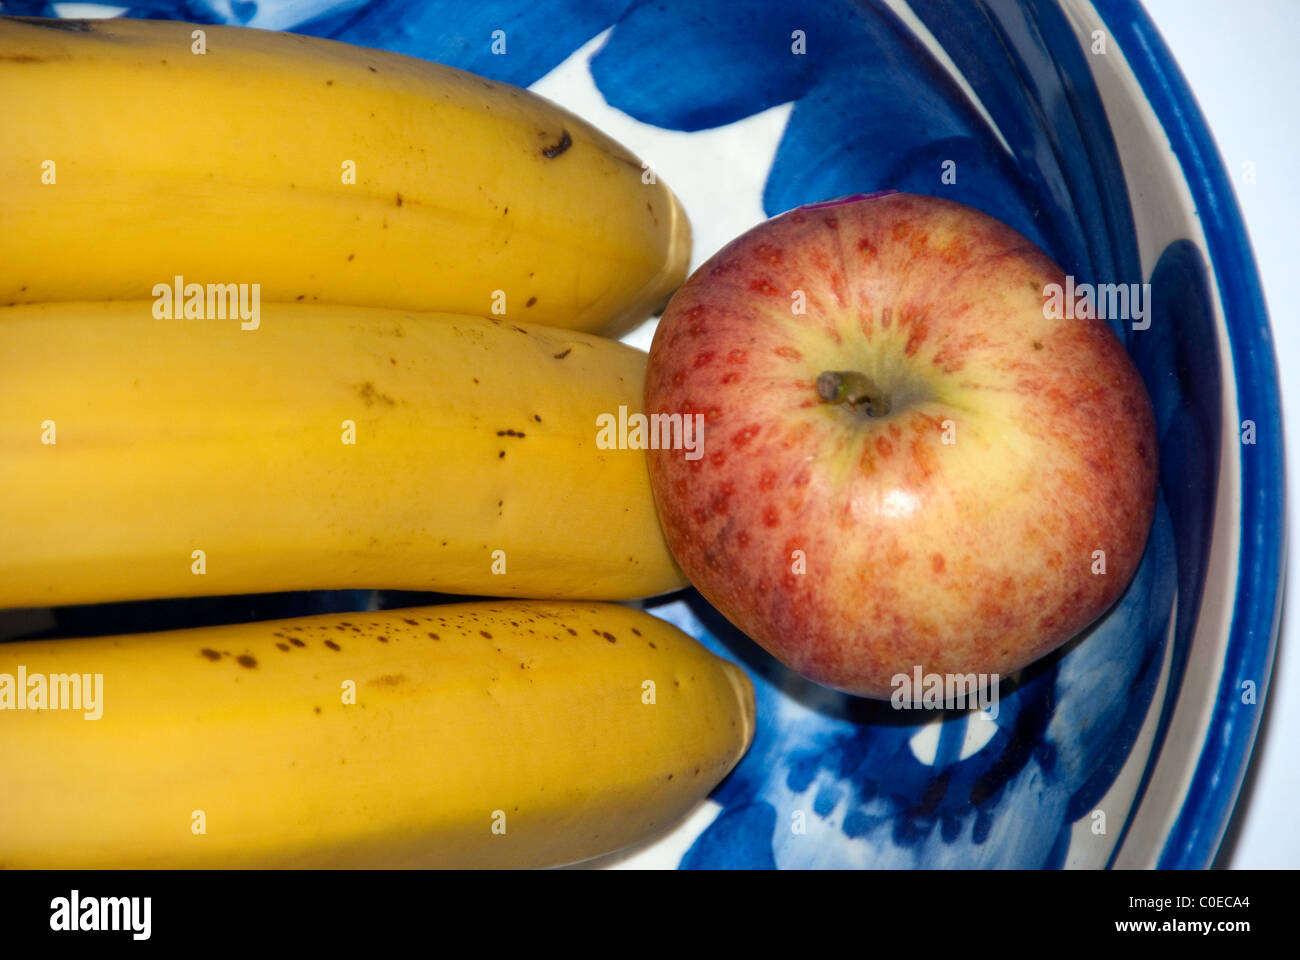 Bananas and apple in a bowl Stock Photo